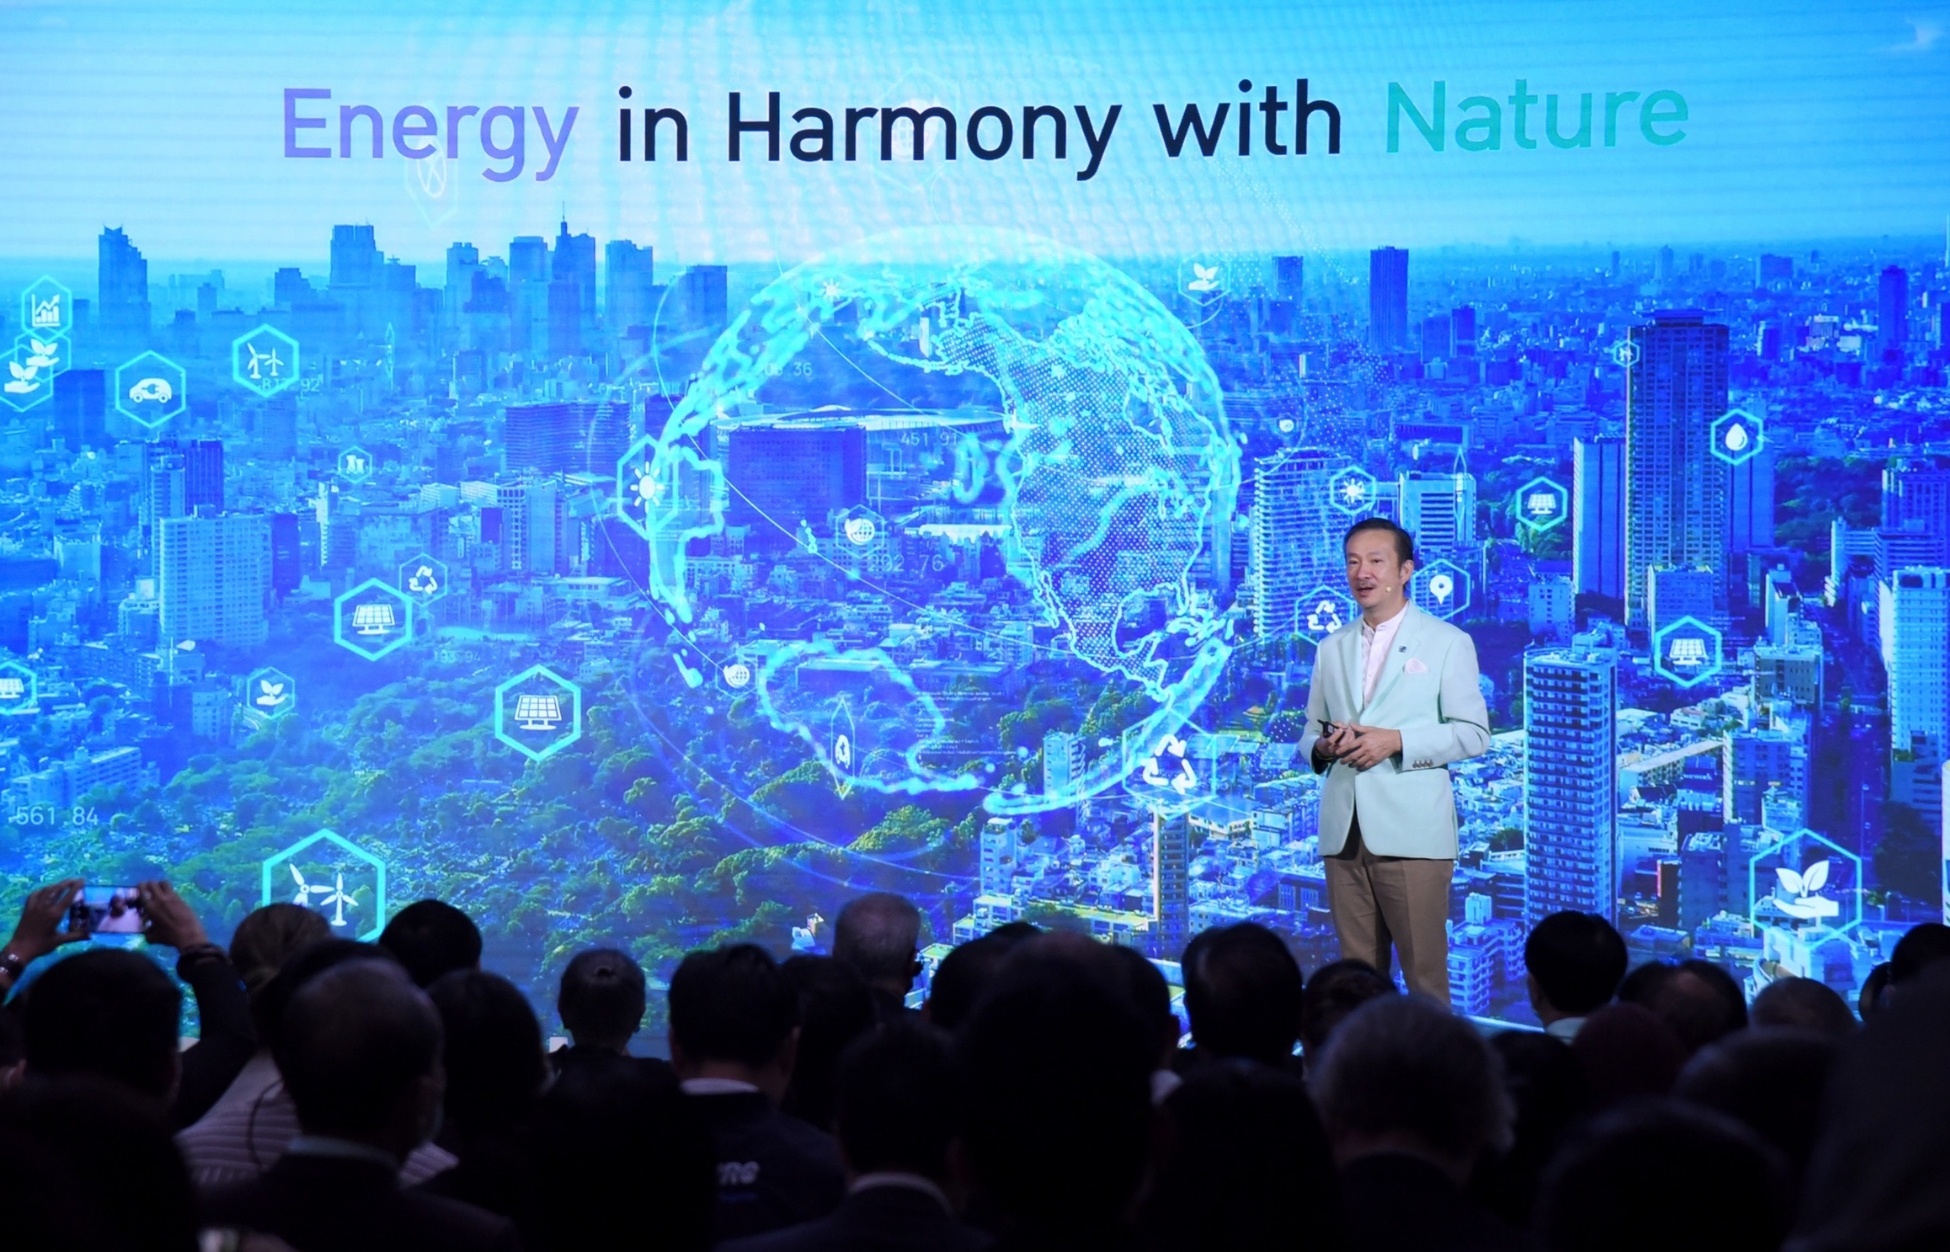 “Energy in Harmony with Nature” Energy Security and Environmental Sustainability